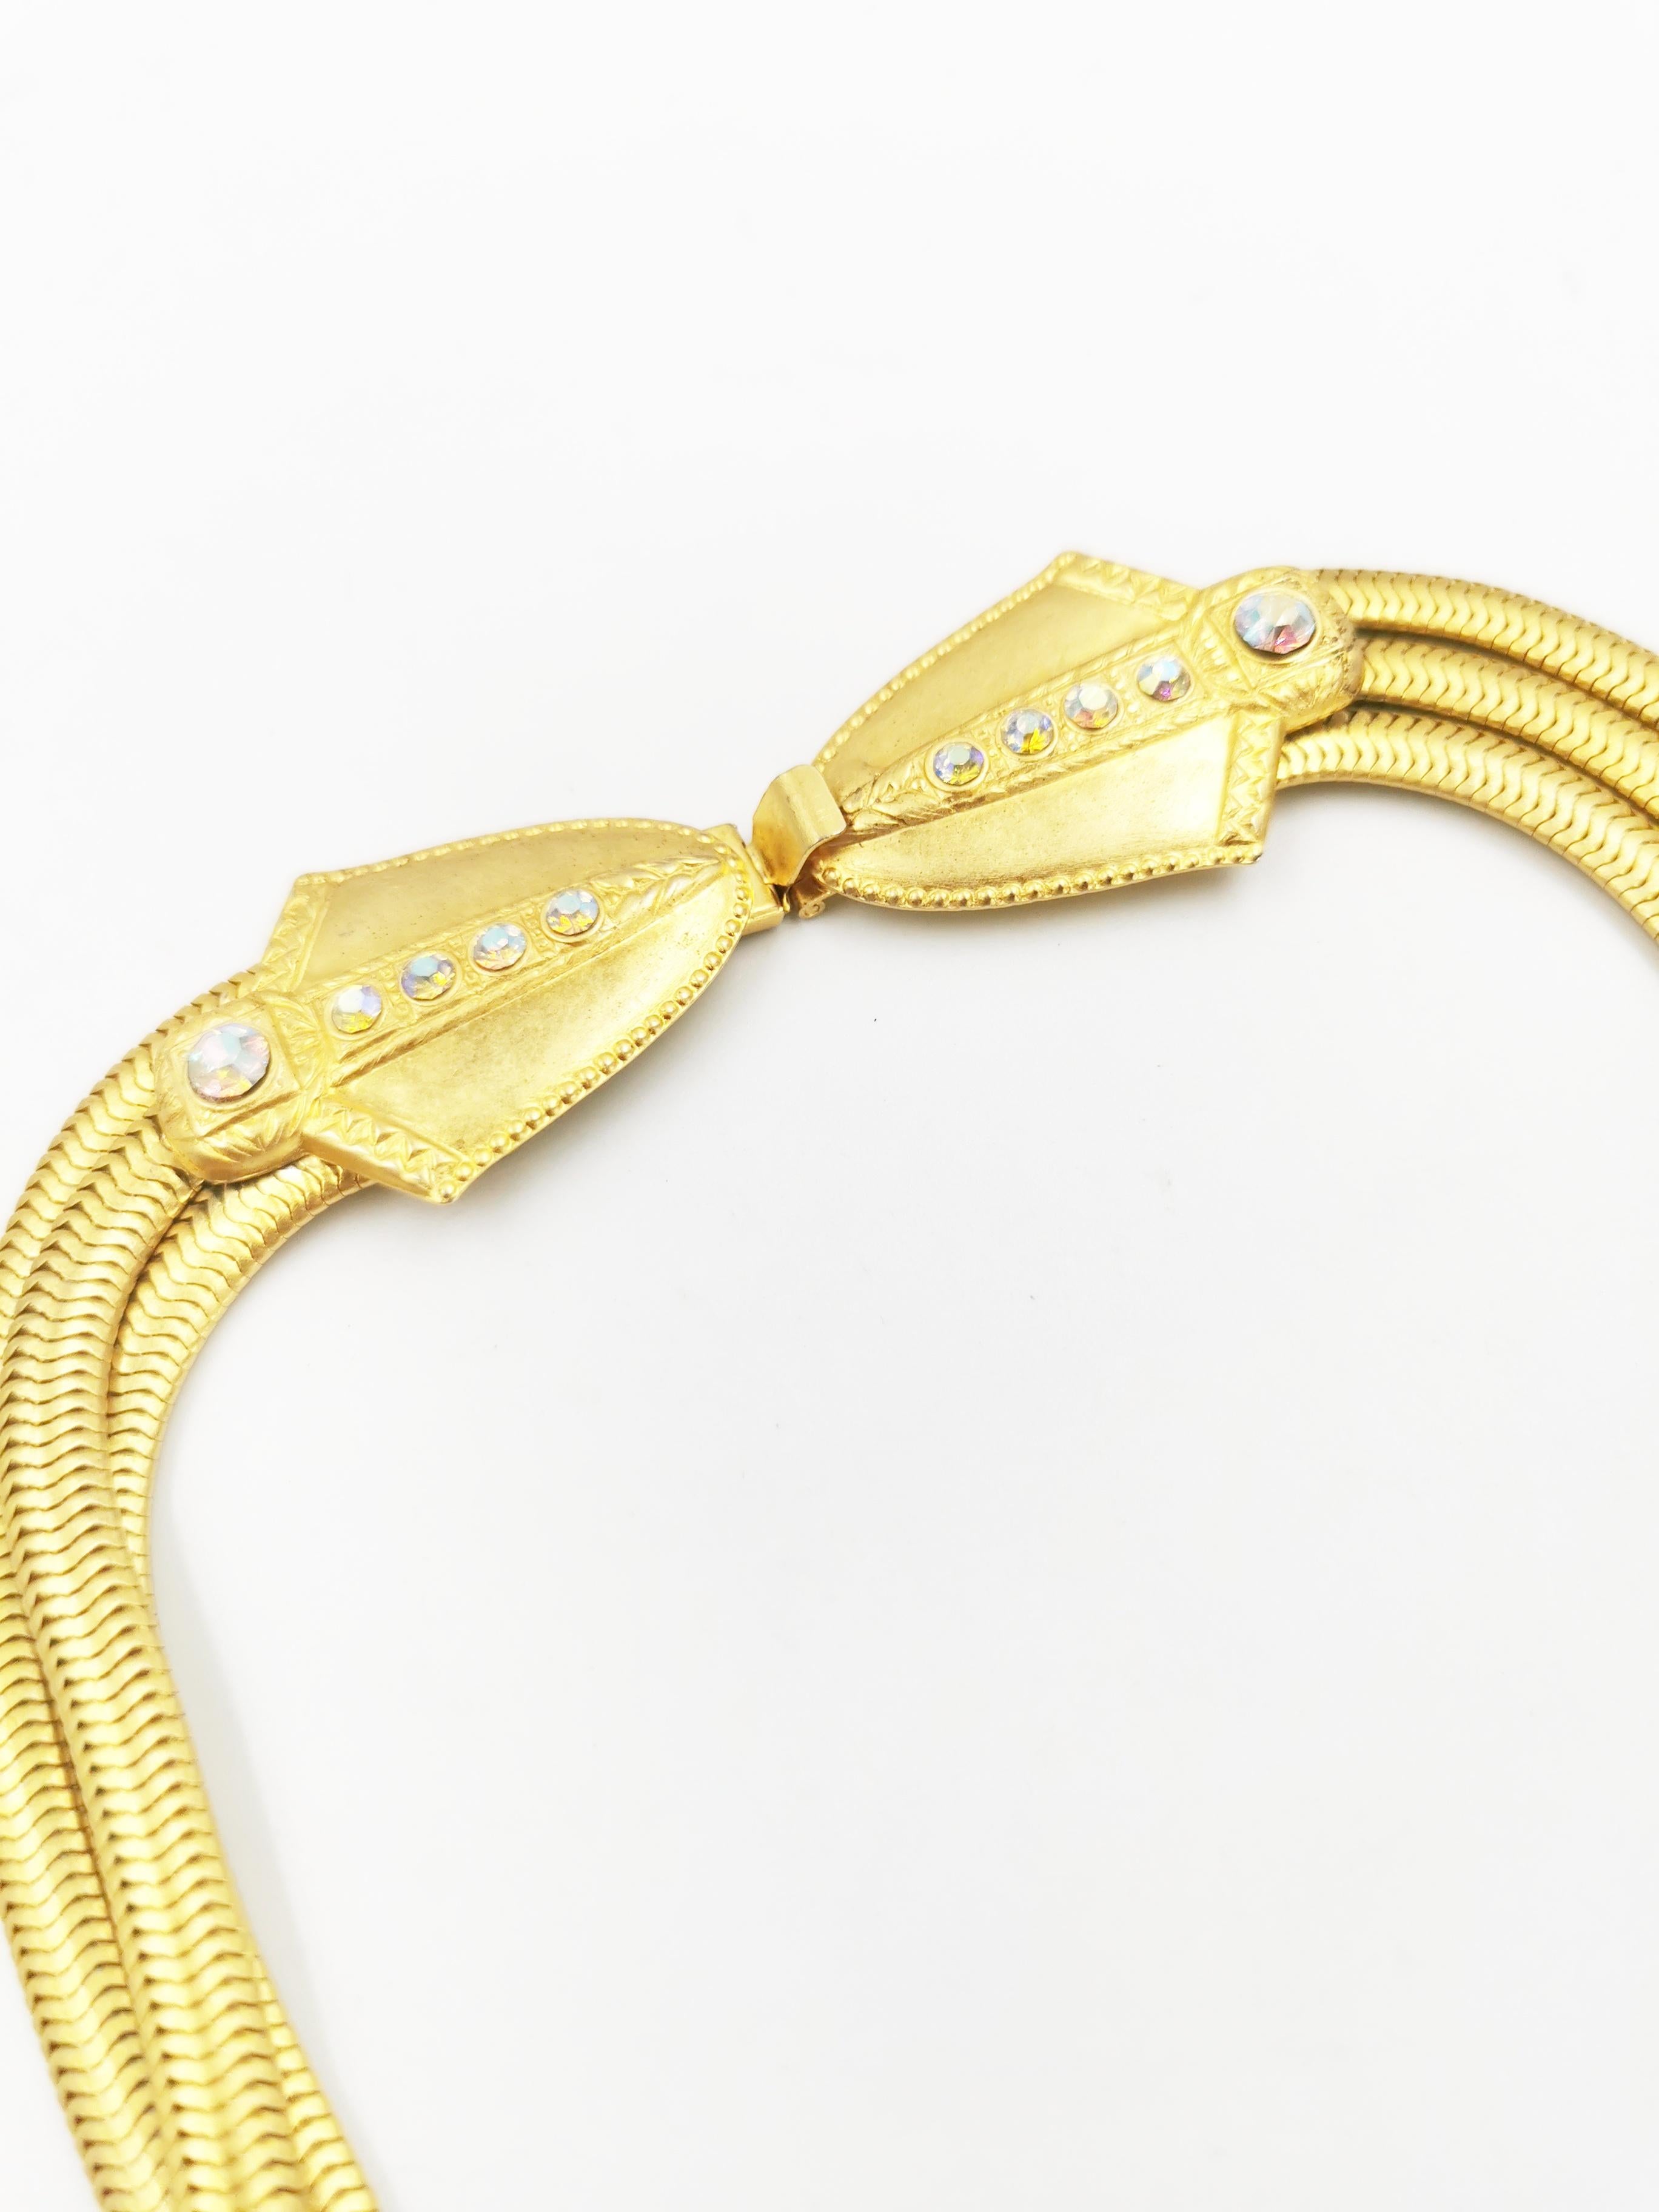 Vintage Gianni Versace Hoop Choker. A versace collector piece!

Feature
Material: Metal
Condition: Vintage
Colour: Gold
Period: 1990-
Place of Origin: Italy